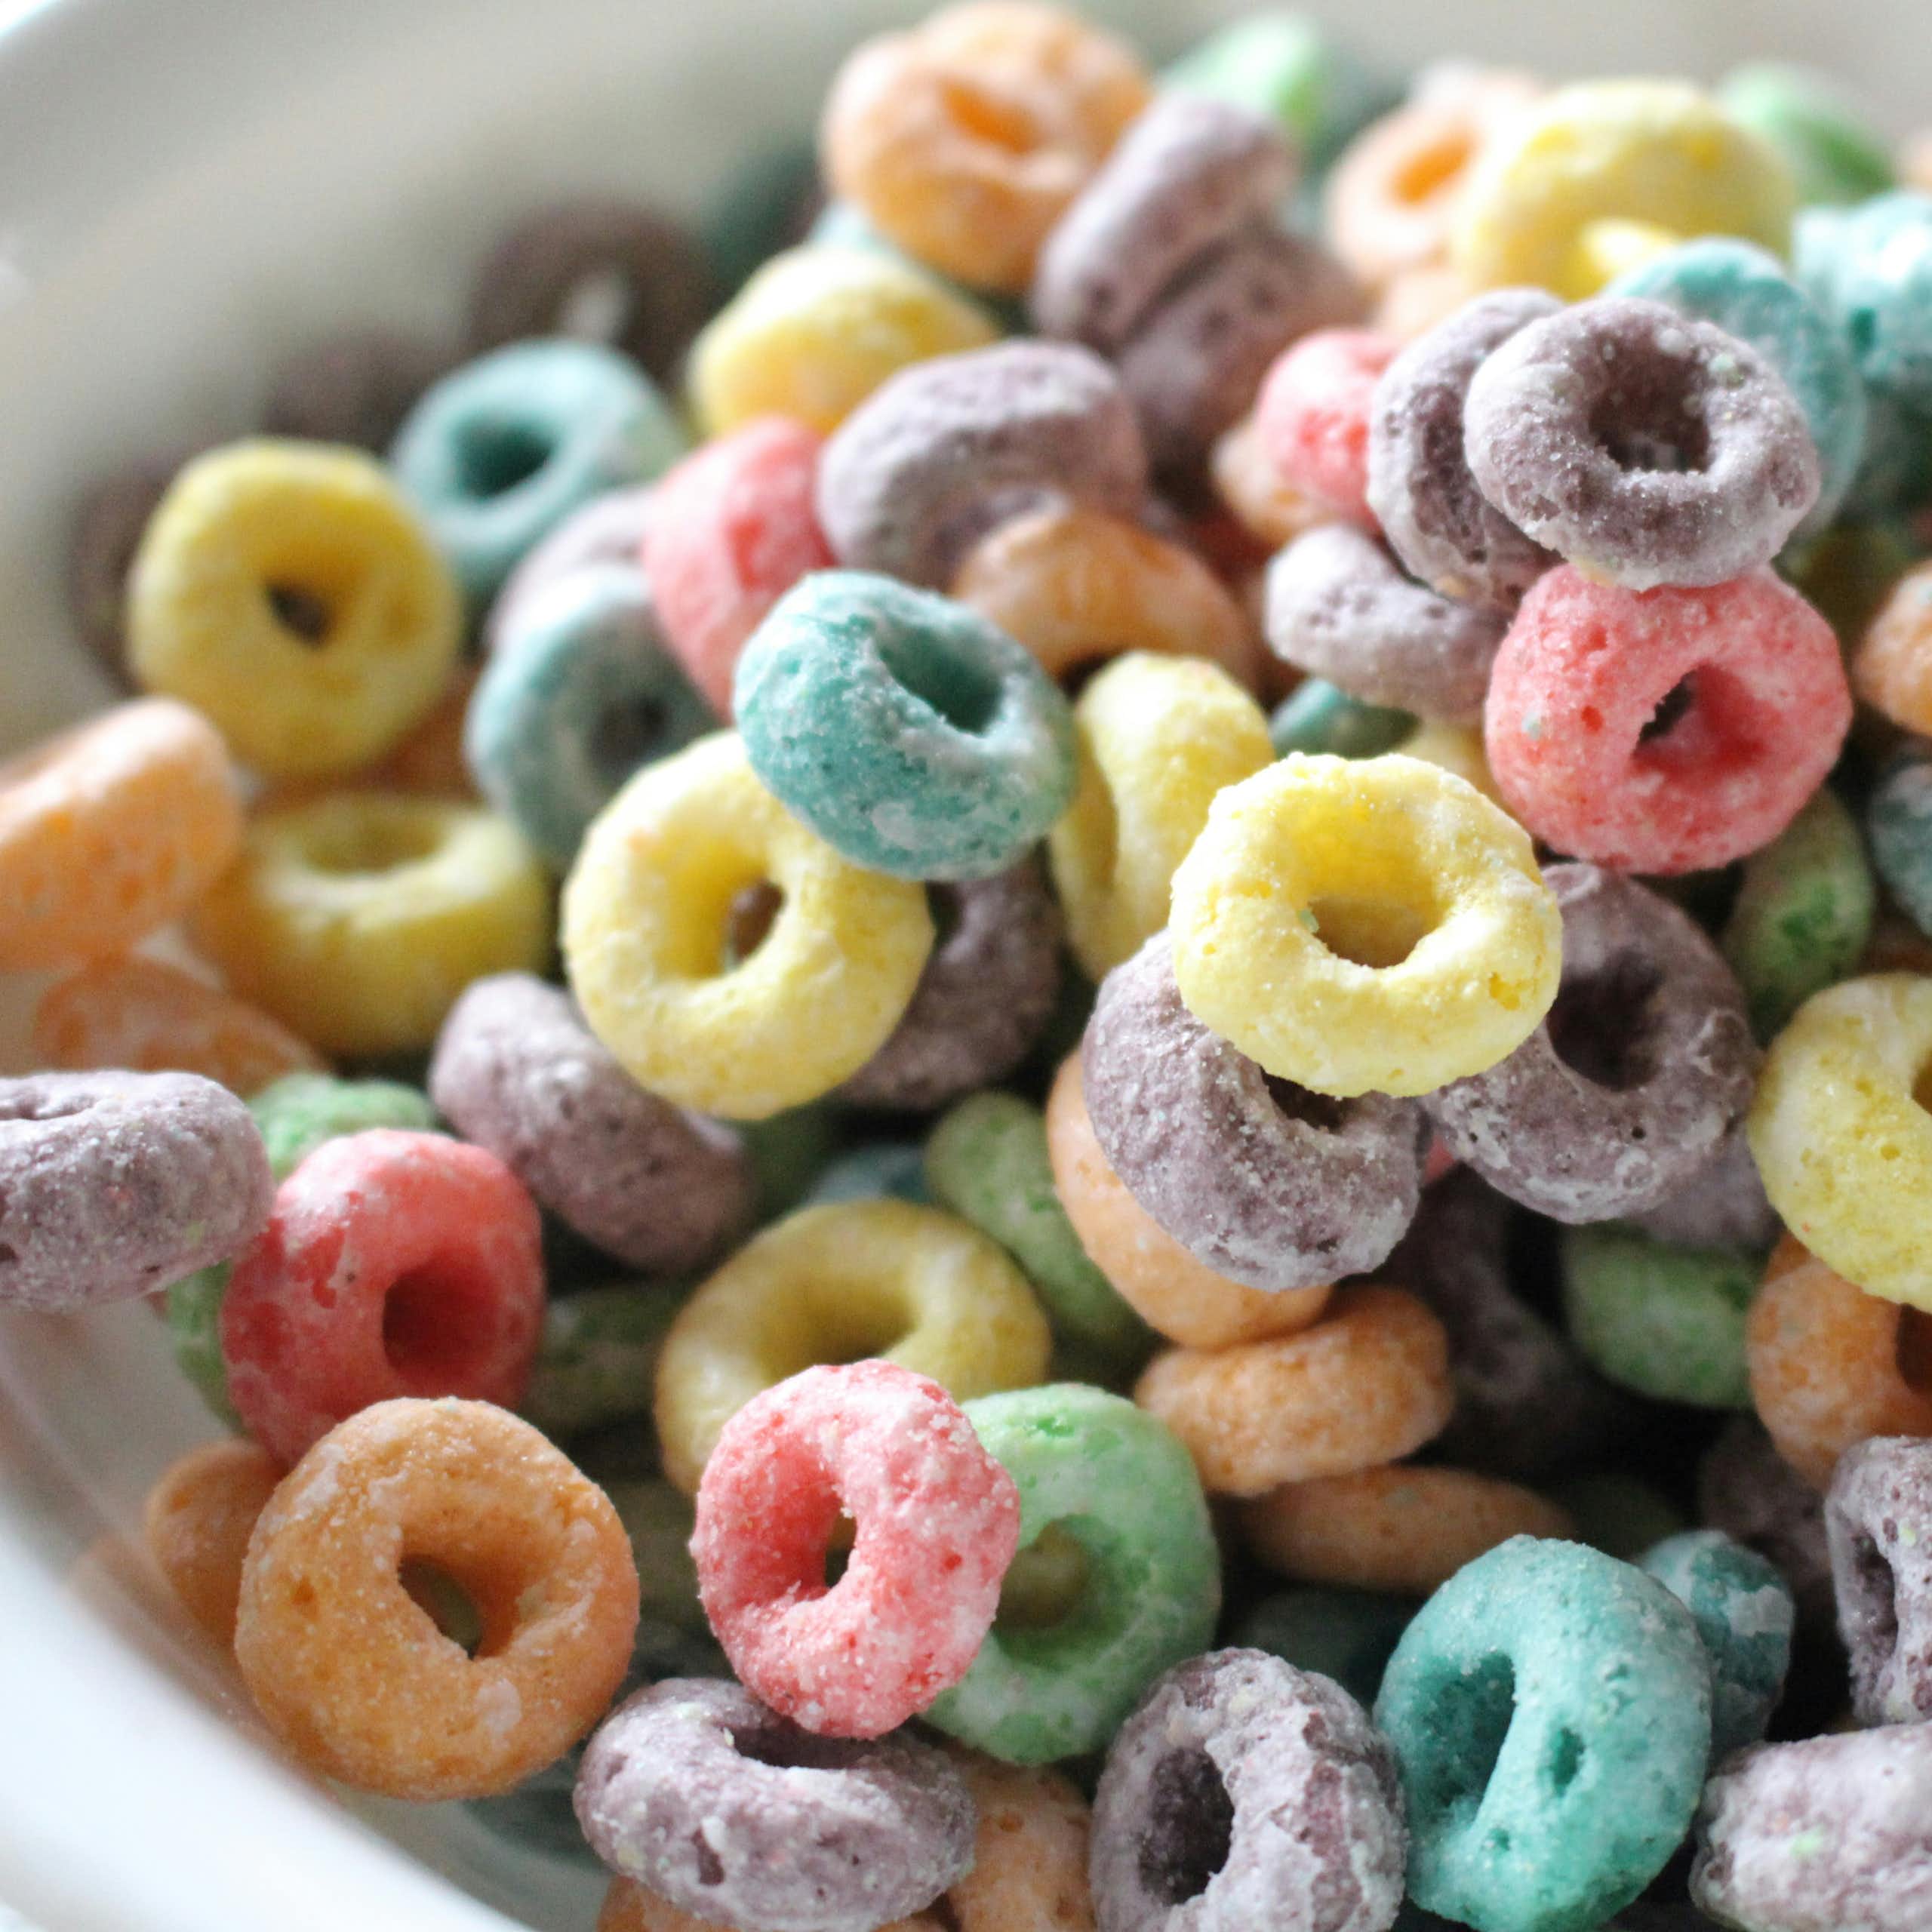 A bowl of Froot Loops breakfast cereal.